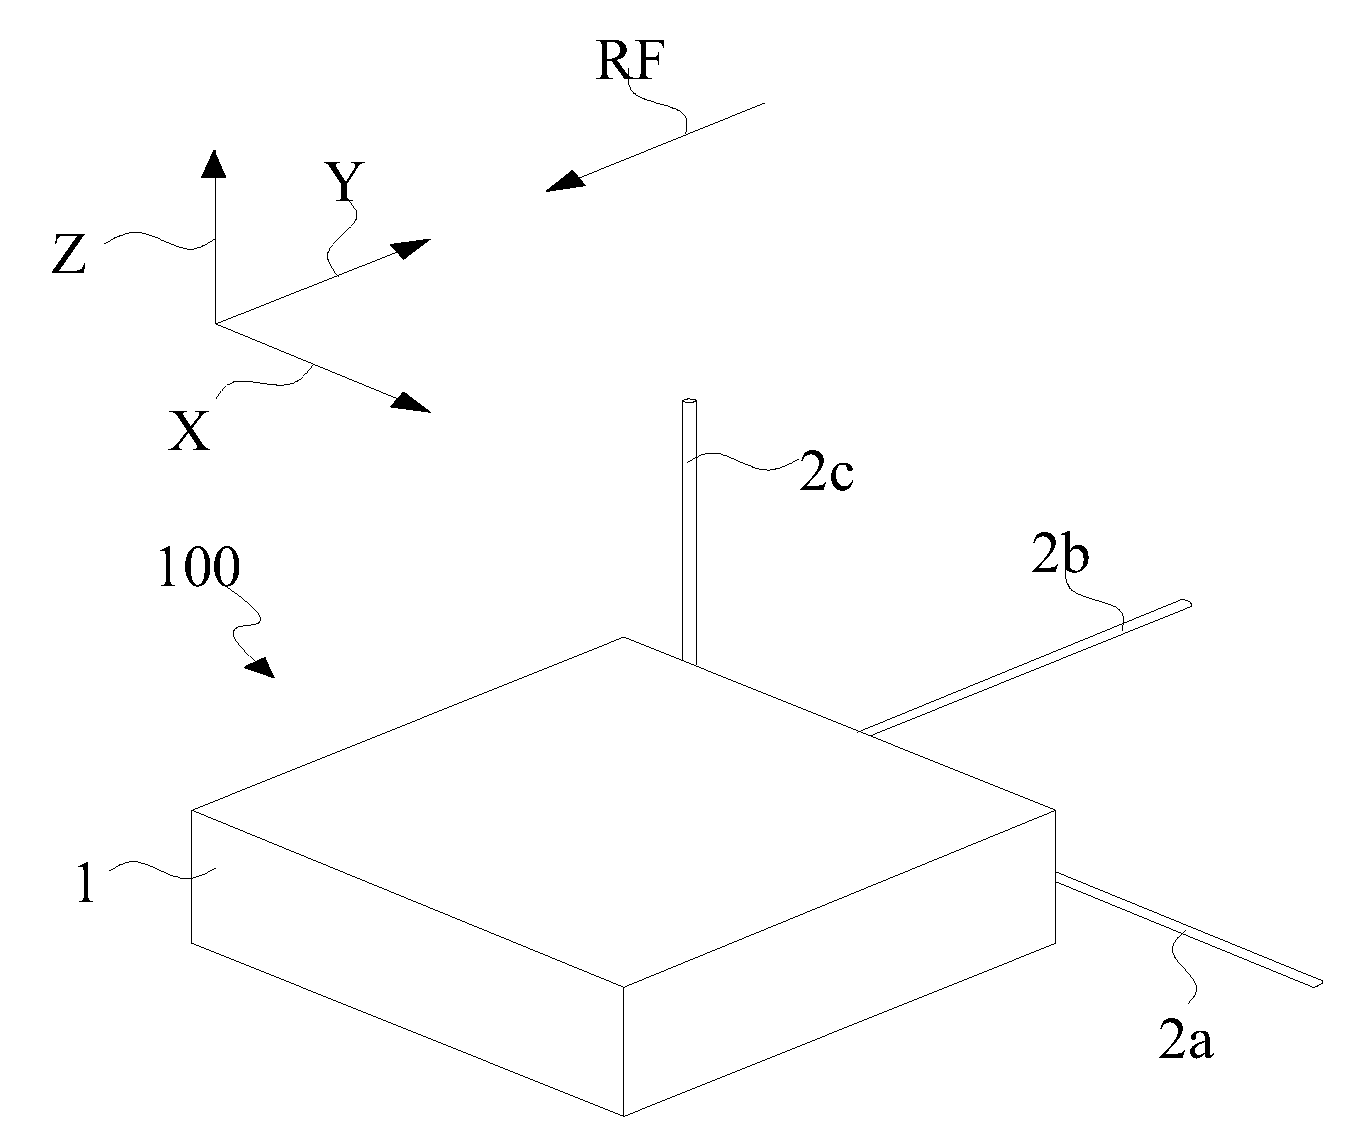 Radio frequency identification reader having antennas in different directions